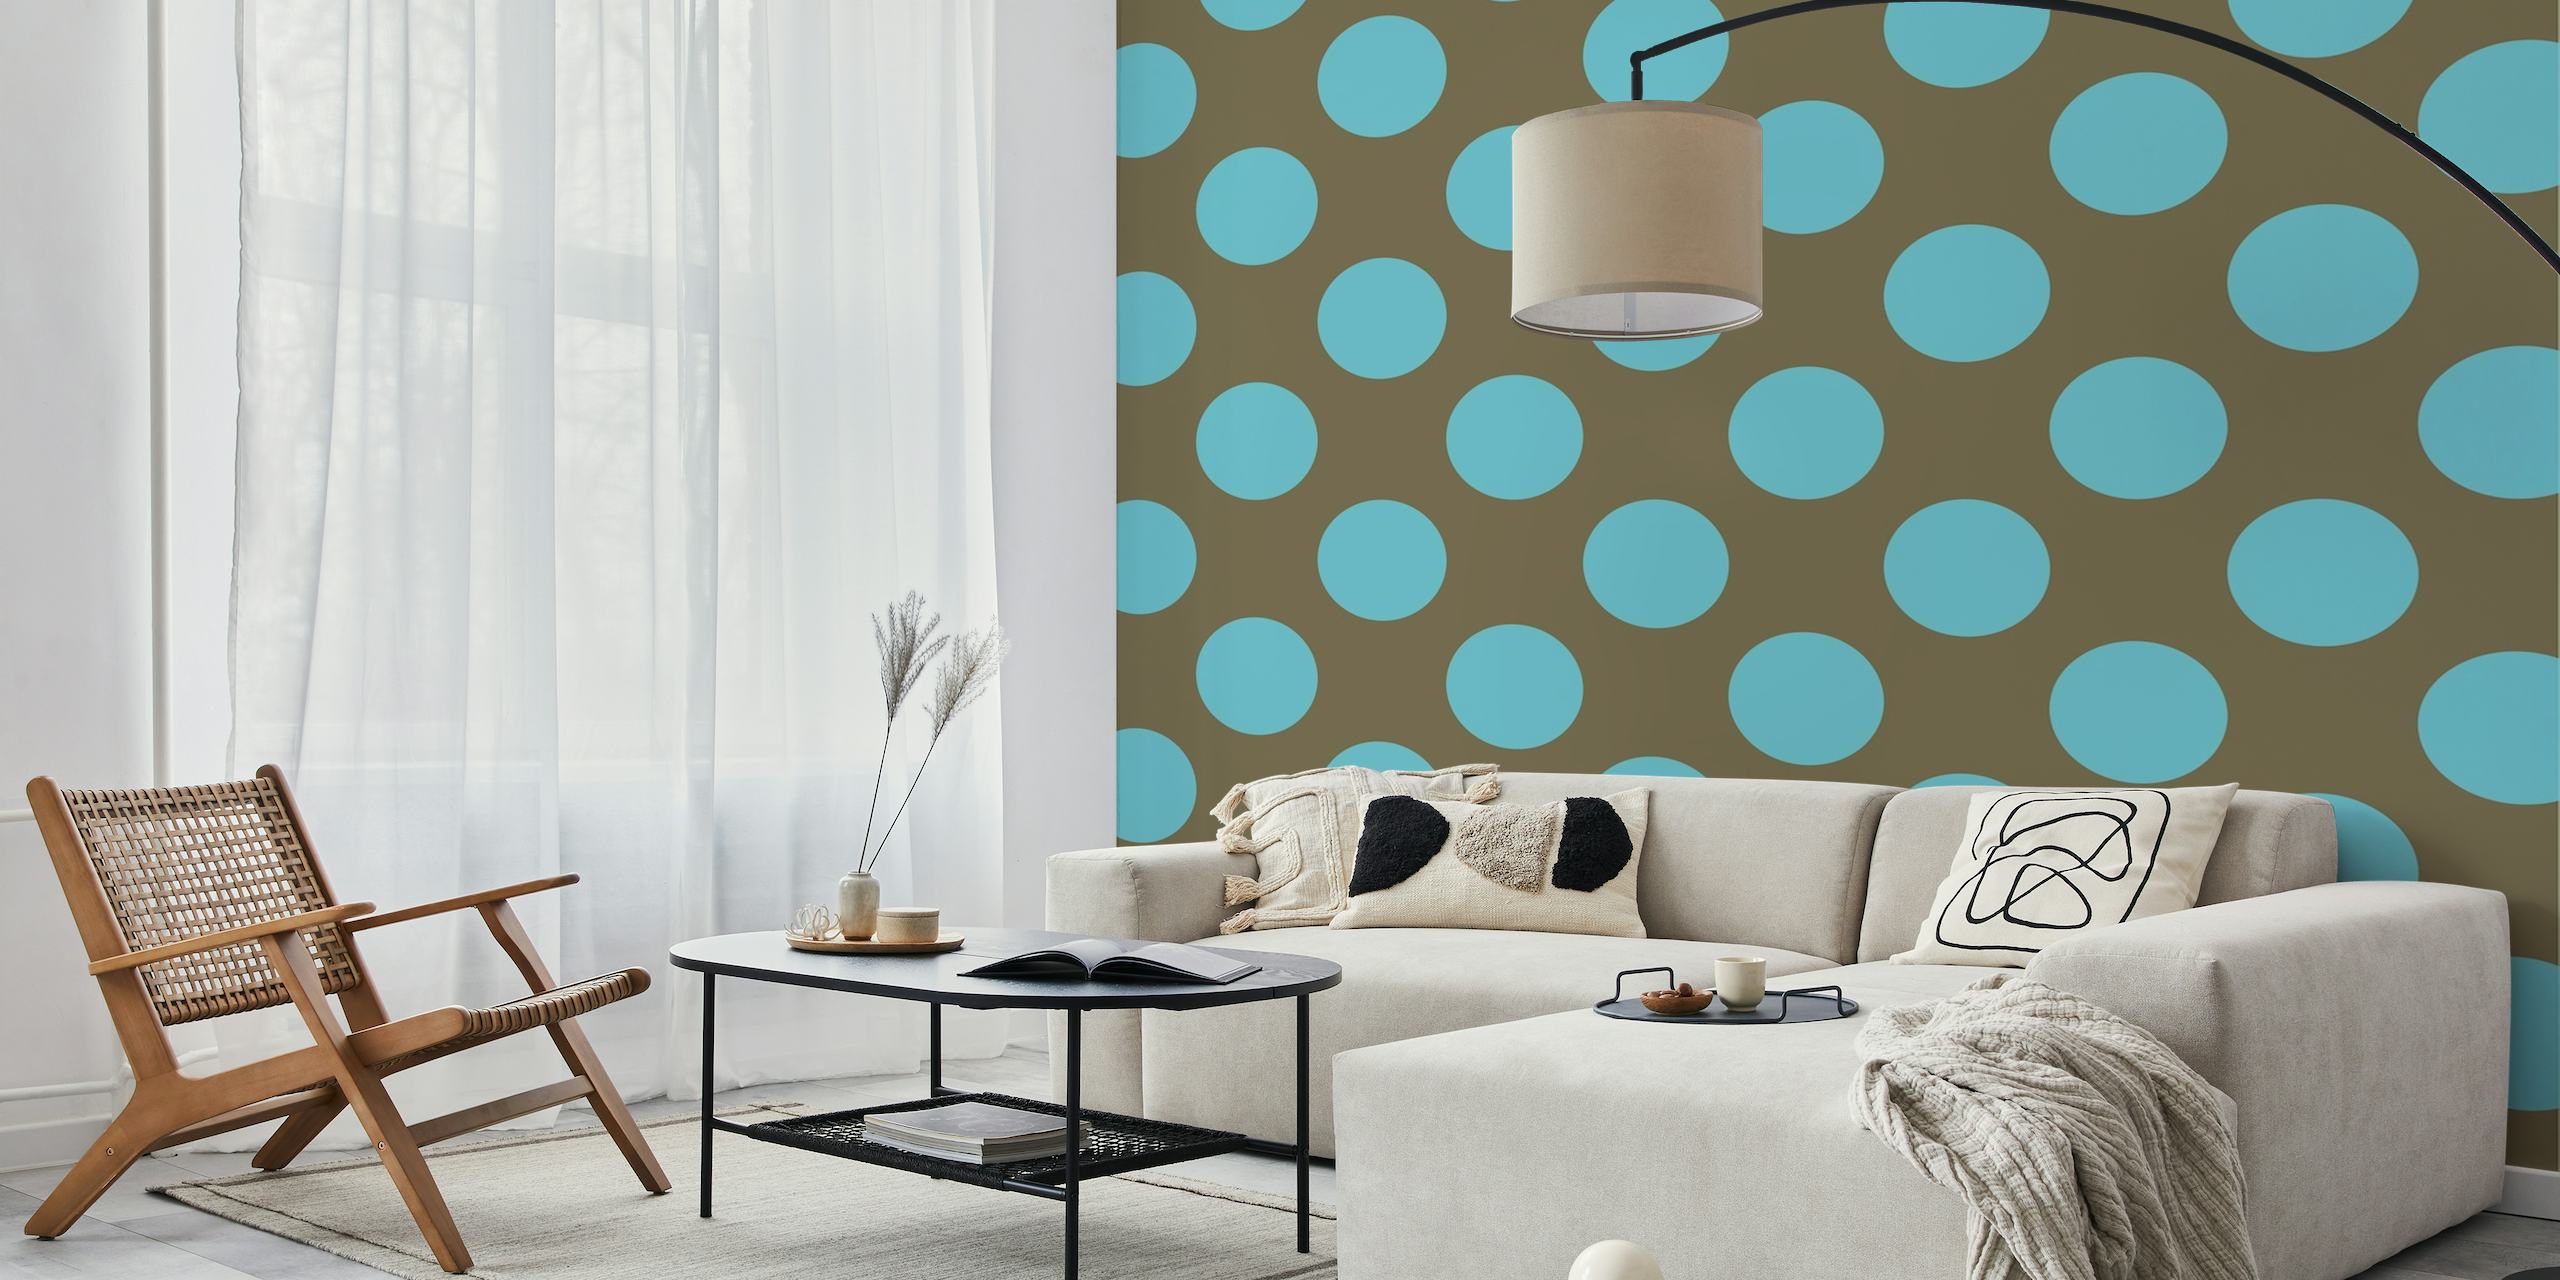 Brown Turquoise polka dotted art behang